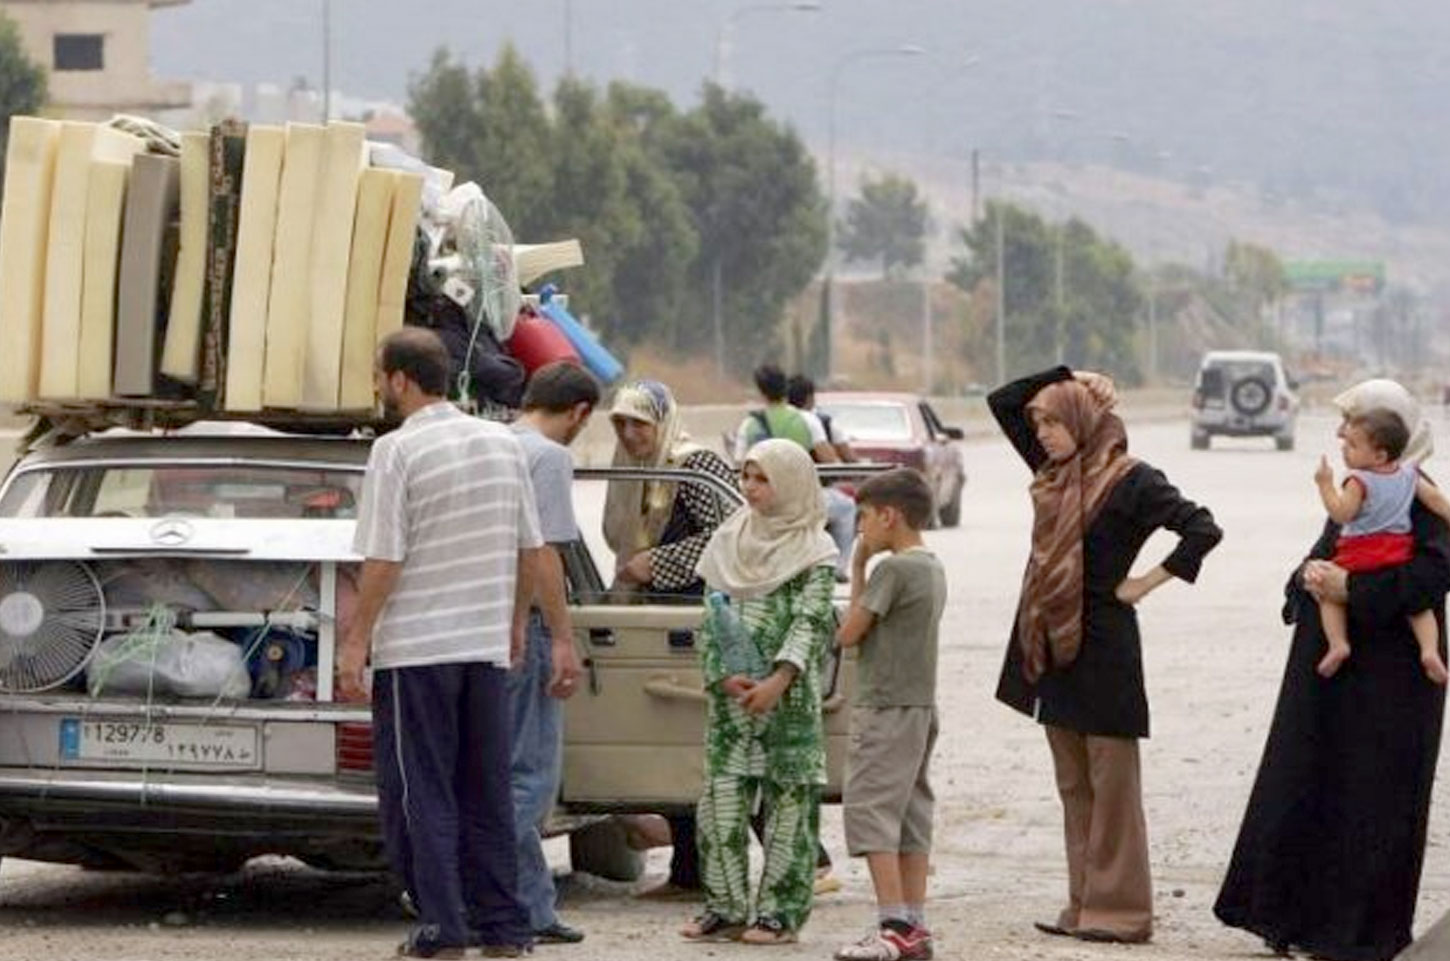 A family who lives in south Lebanon packs up to relocate to the north, as the danger of war looms.